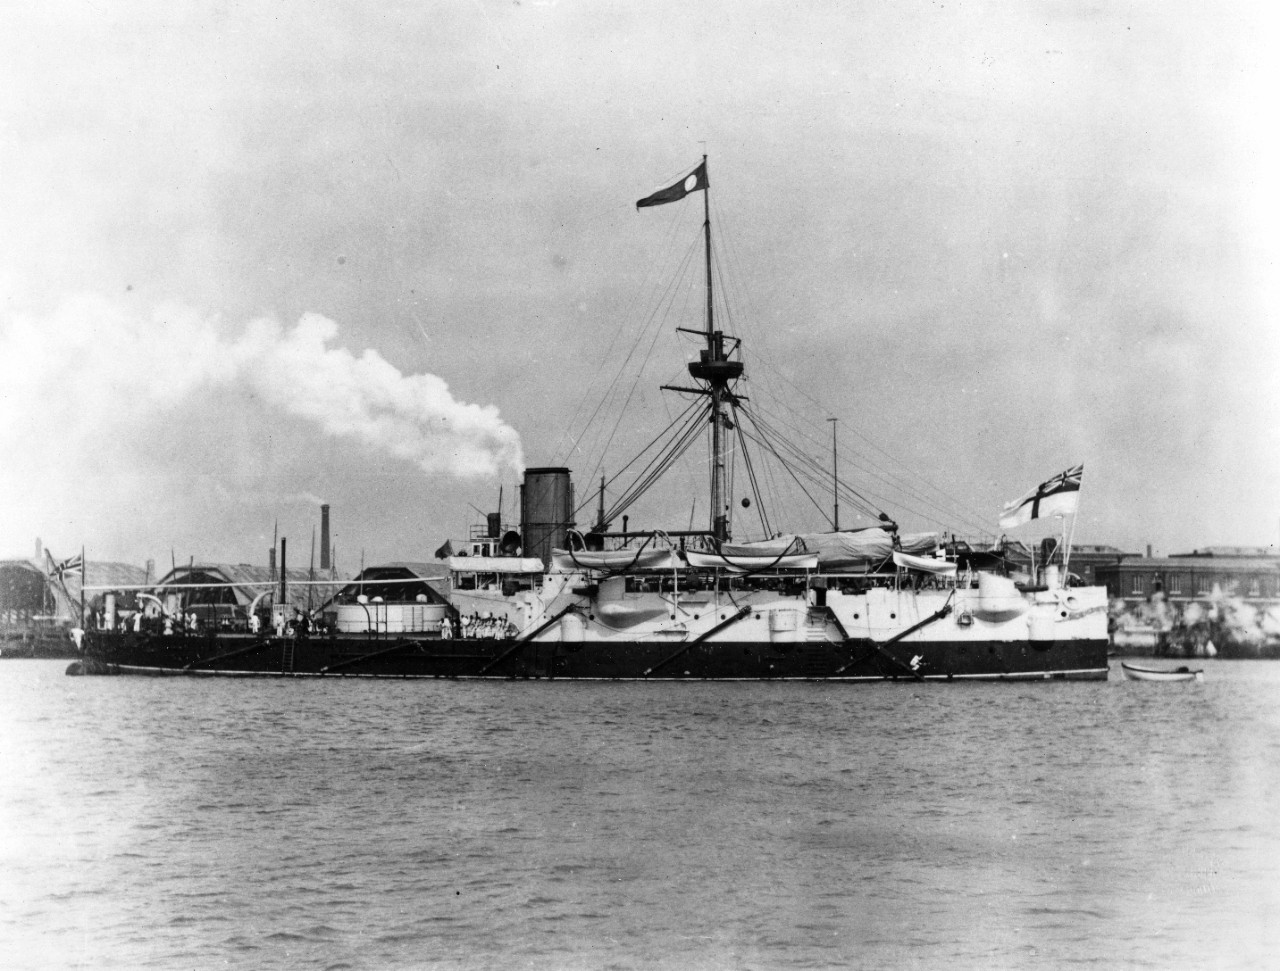 Hero, British Coast Defense Battleship (1885-1908), probably photographed at Portsmouth where she served as a gunnery school ship from 1889 to 1902. The pennant at the masthead may be for identification in one of the maneuver "fleets." Note the covered shiphouses in the background for new ship construction.